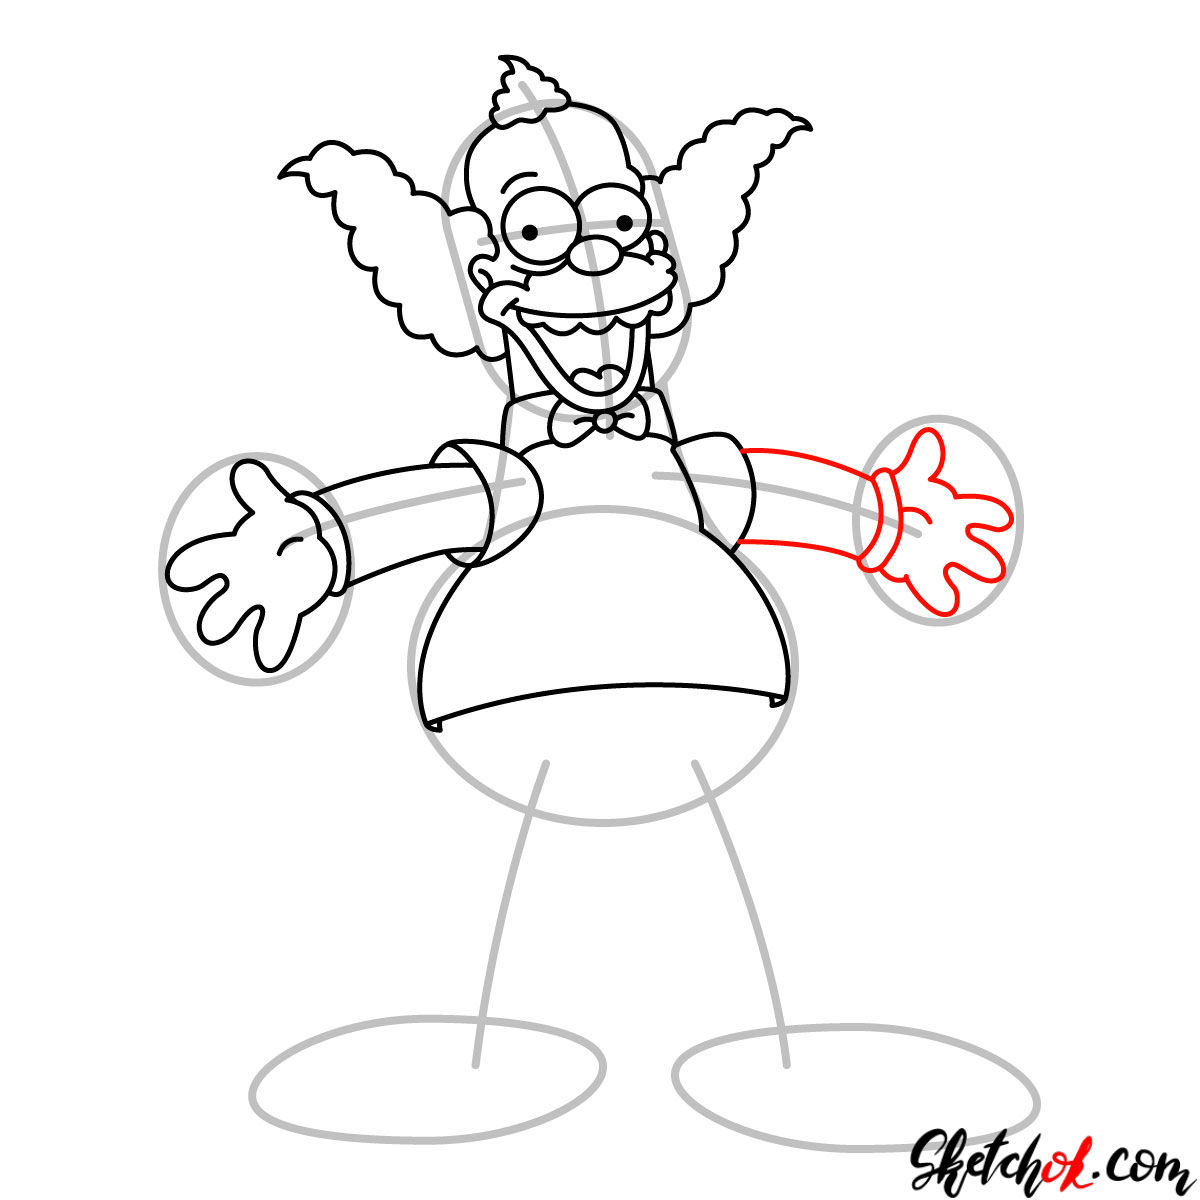 How to draw Krusty the Clown - step 09